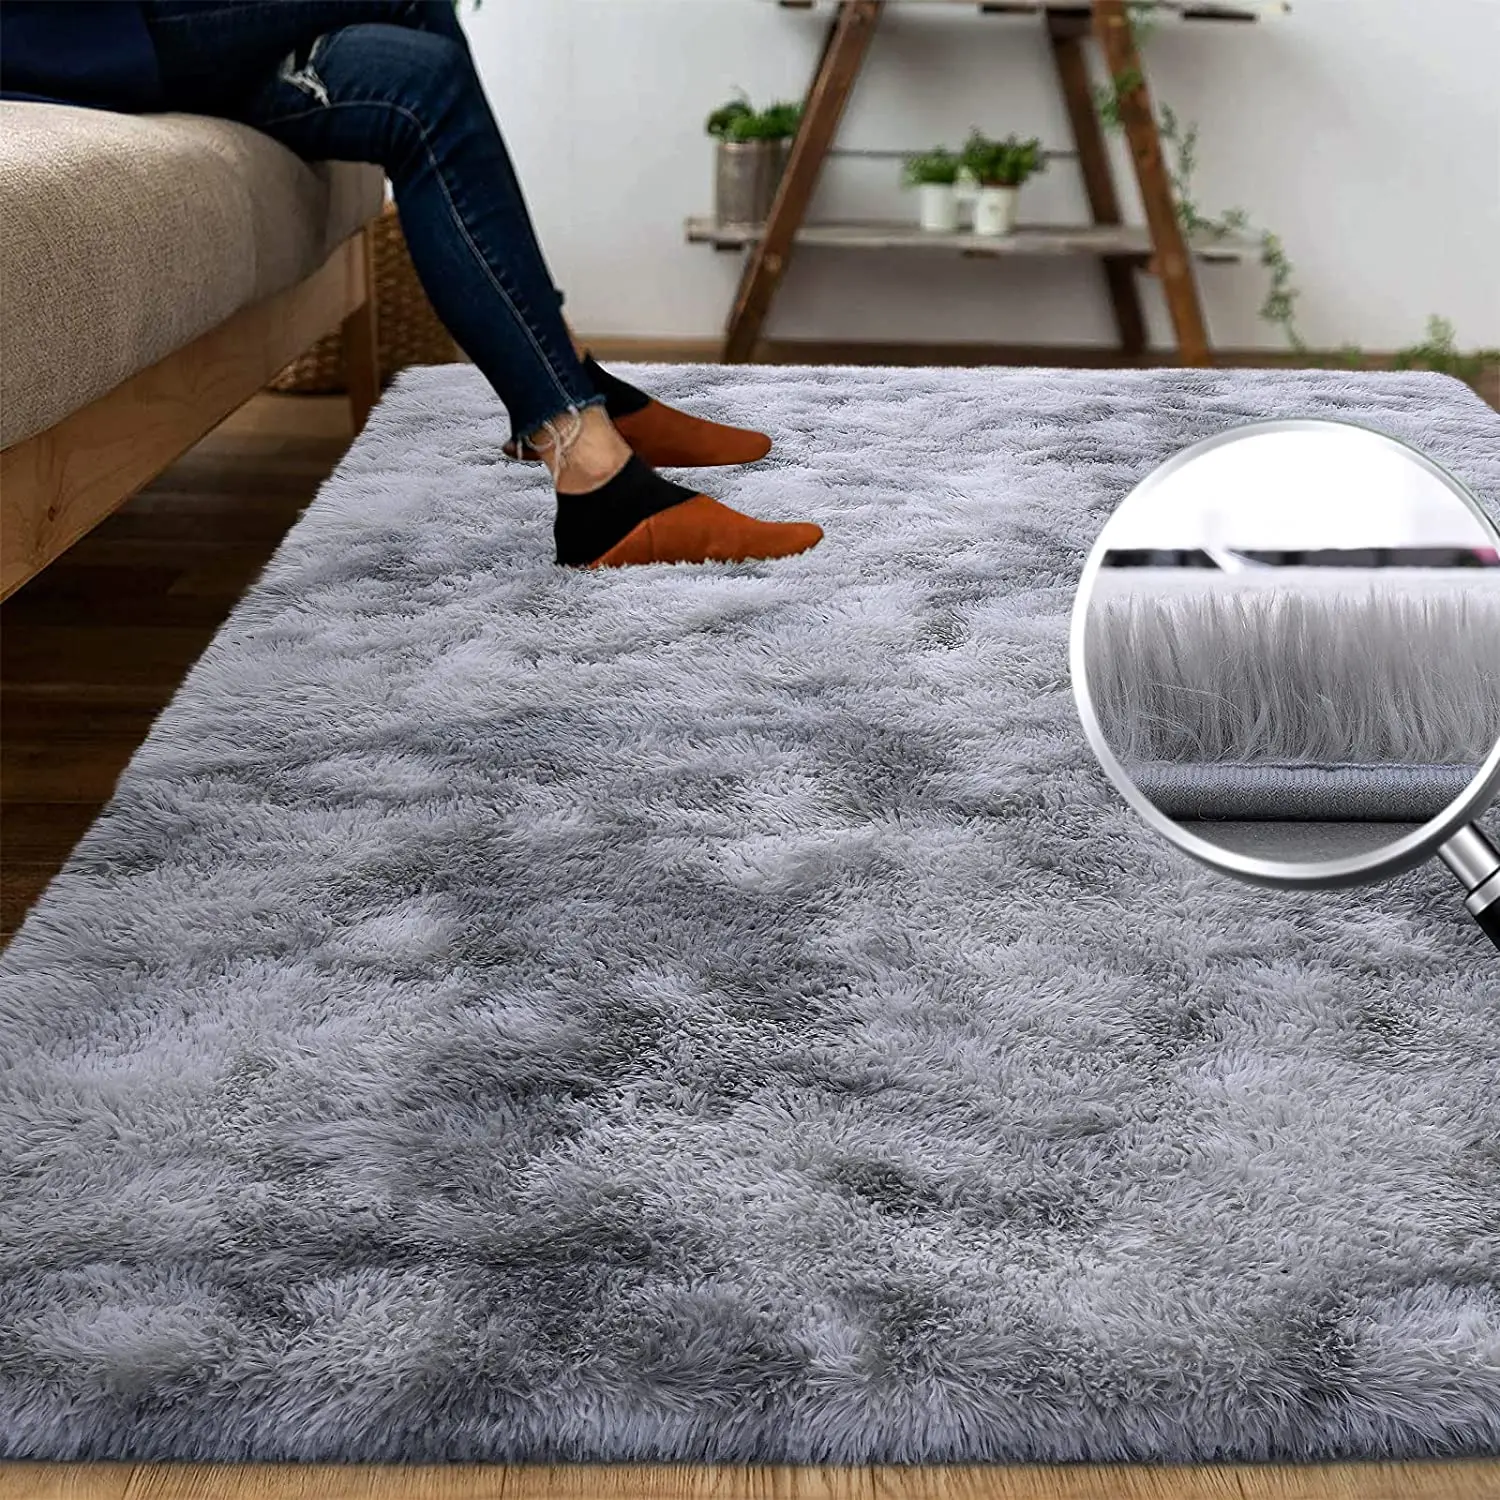 Bubble Kiss Soft Fluffy Rug In The Living Room Shaggy Large Carpets And Rugs For Bedroom Home Decor 4CM Long Pile Floor Mat